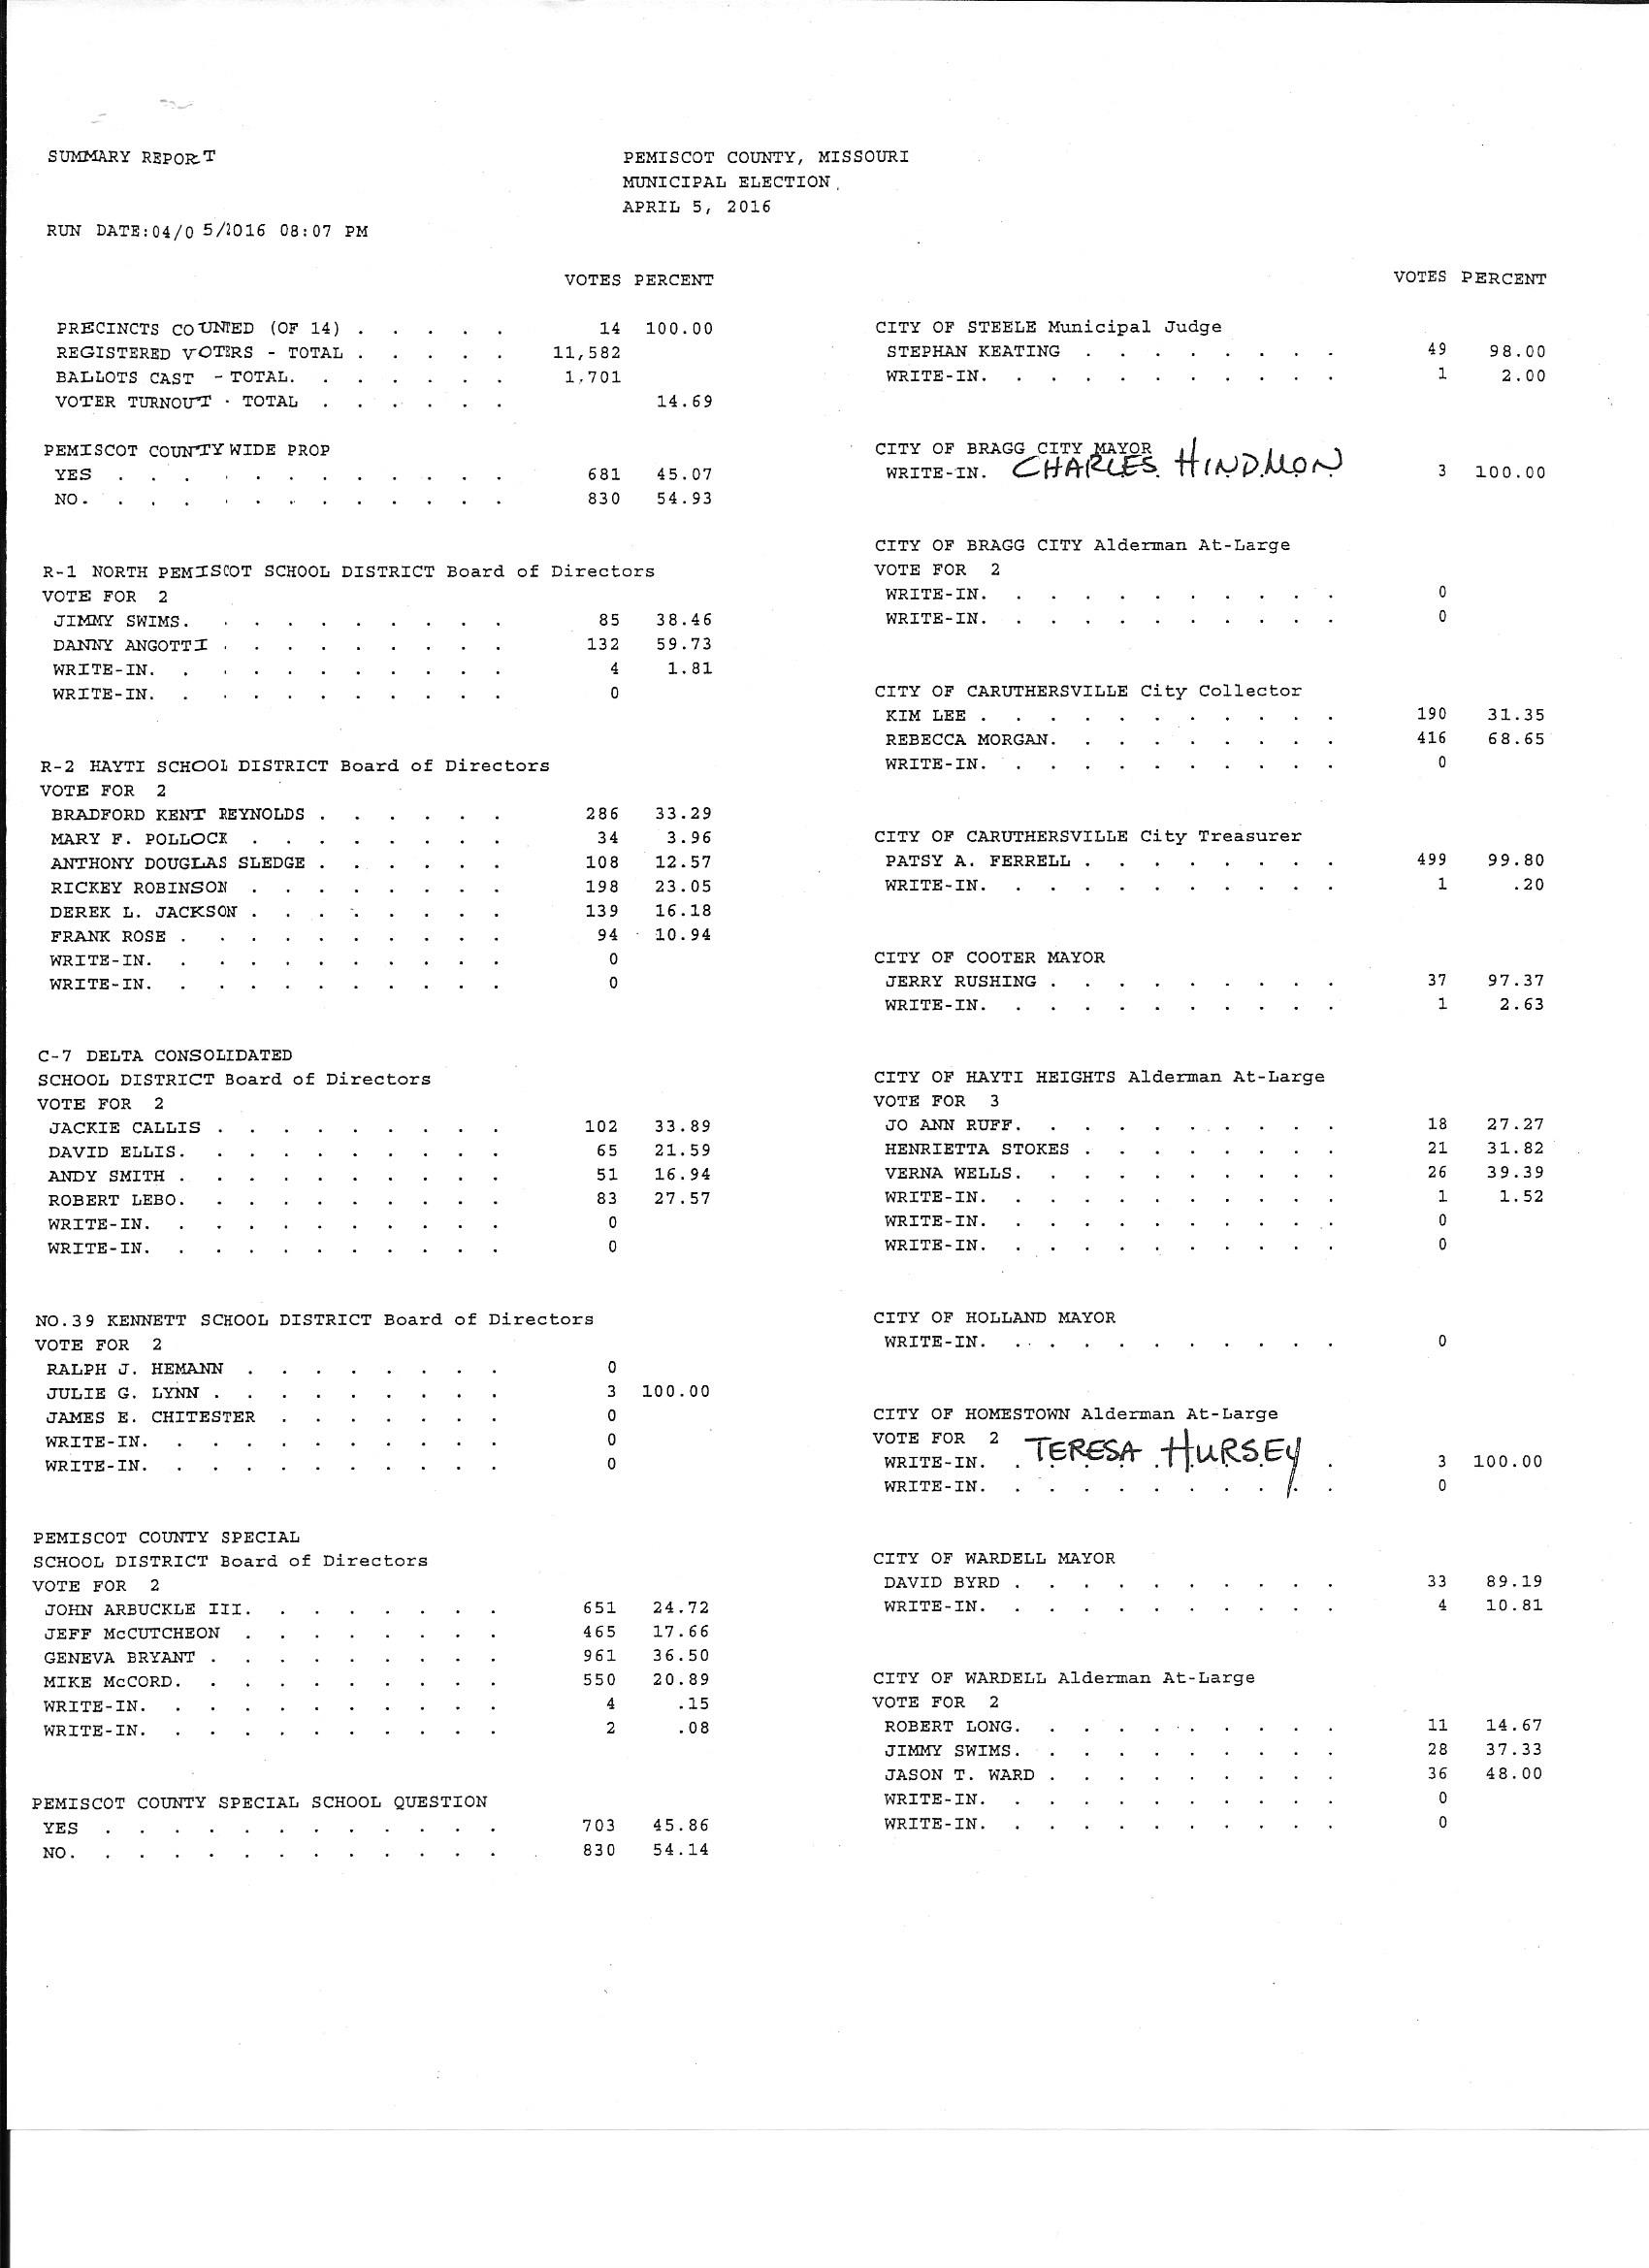 pemiscot county election results april 5 2016